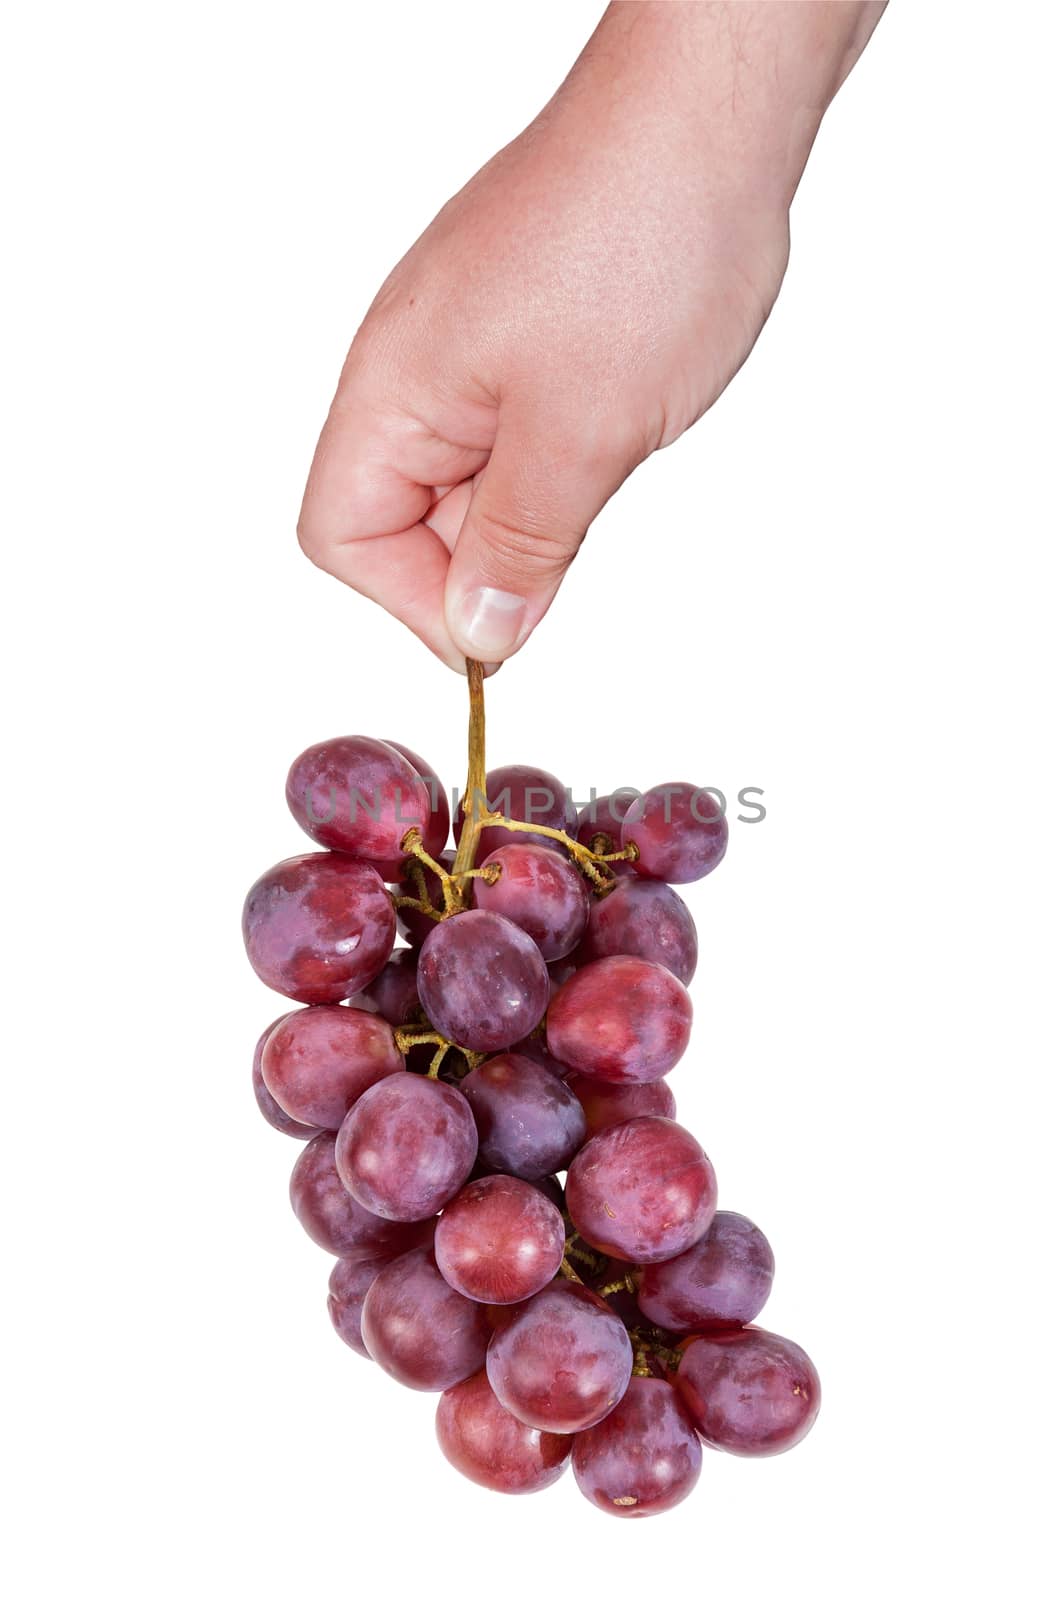 Hand holding bunch of red grapes isolated on white background with clipping path